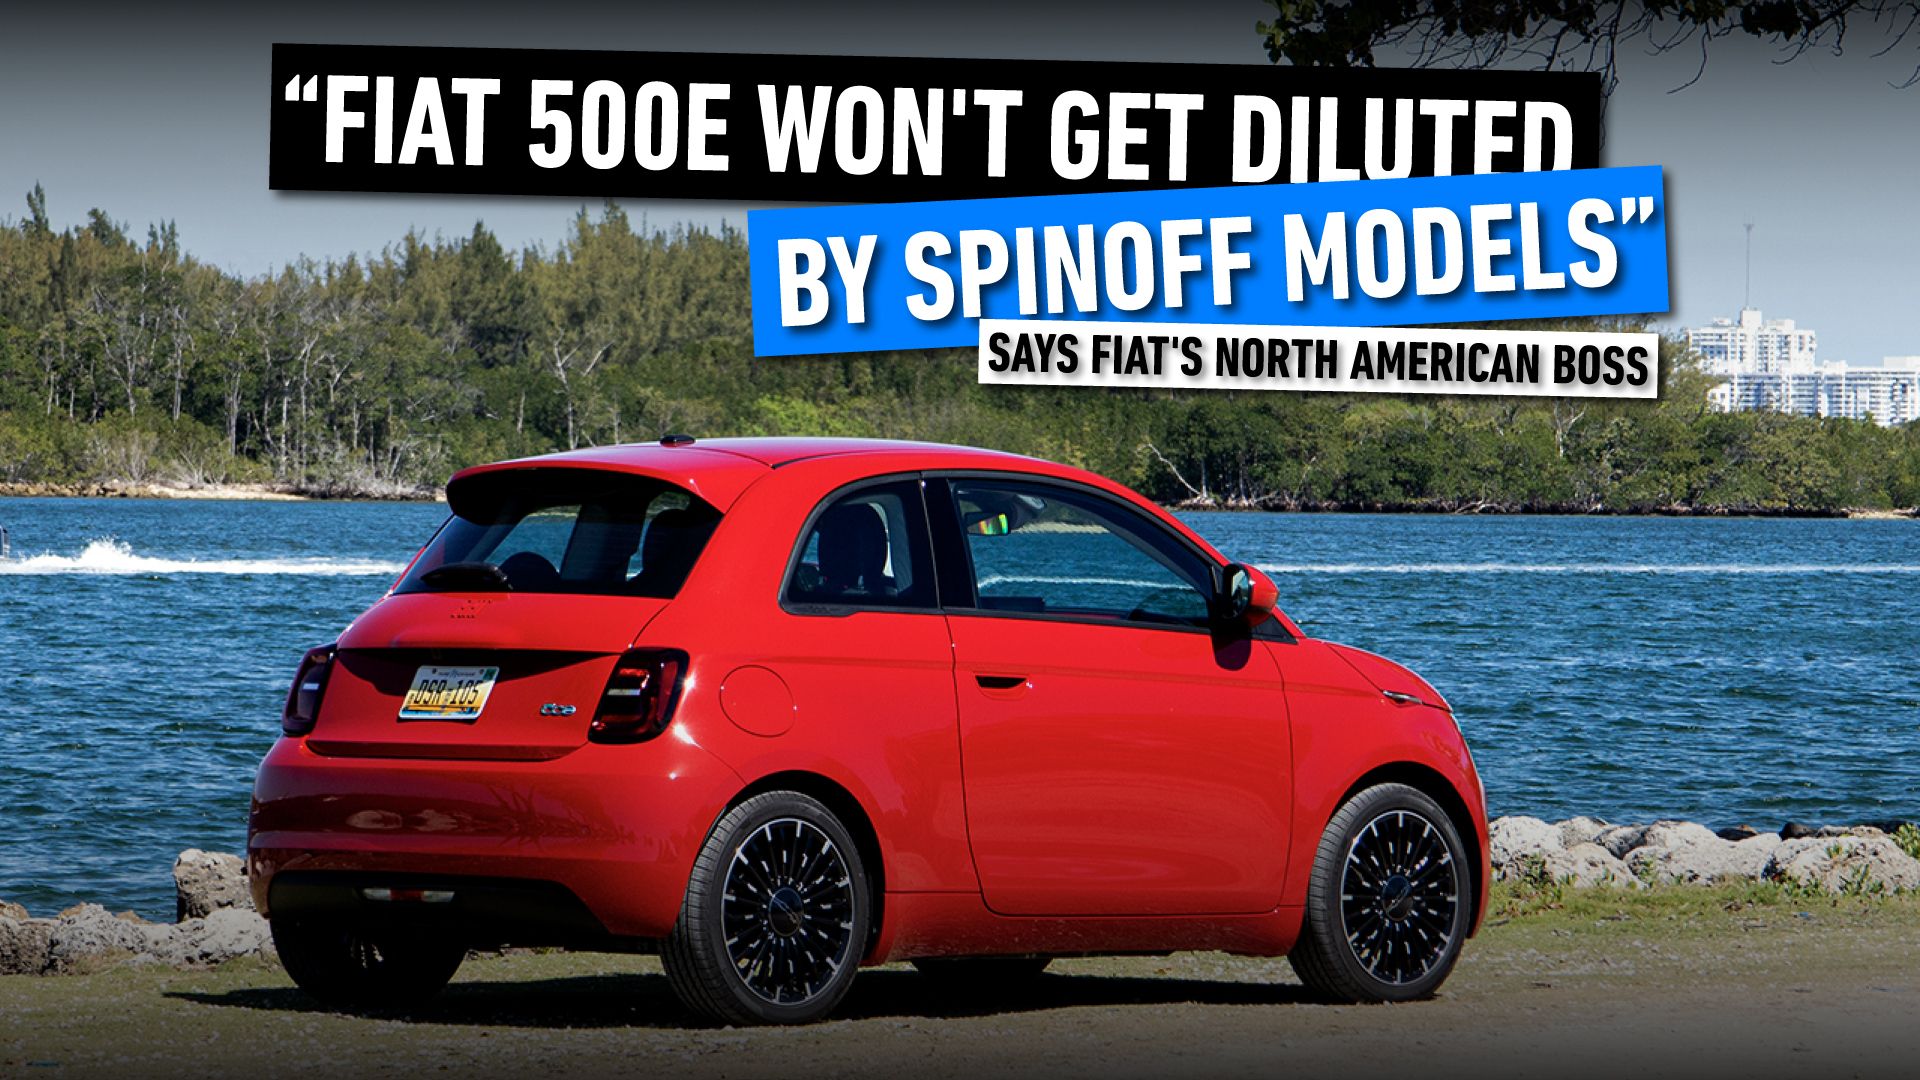 Fiat-500e-Won't-Get-Diluted-2